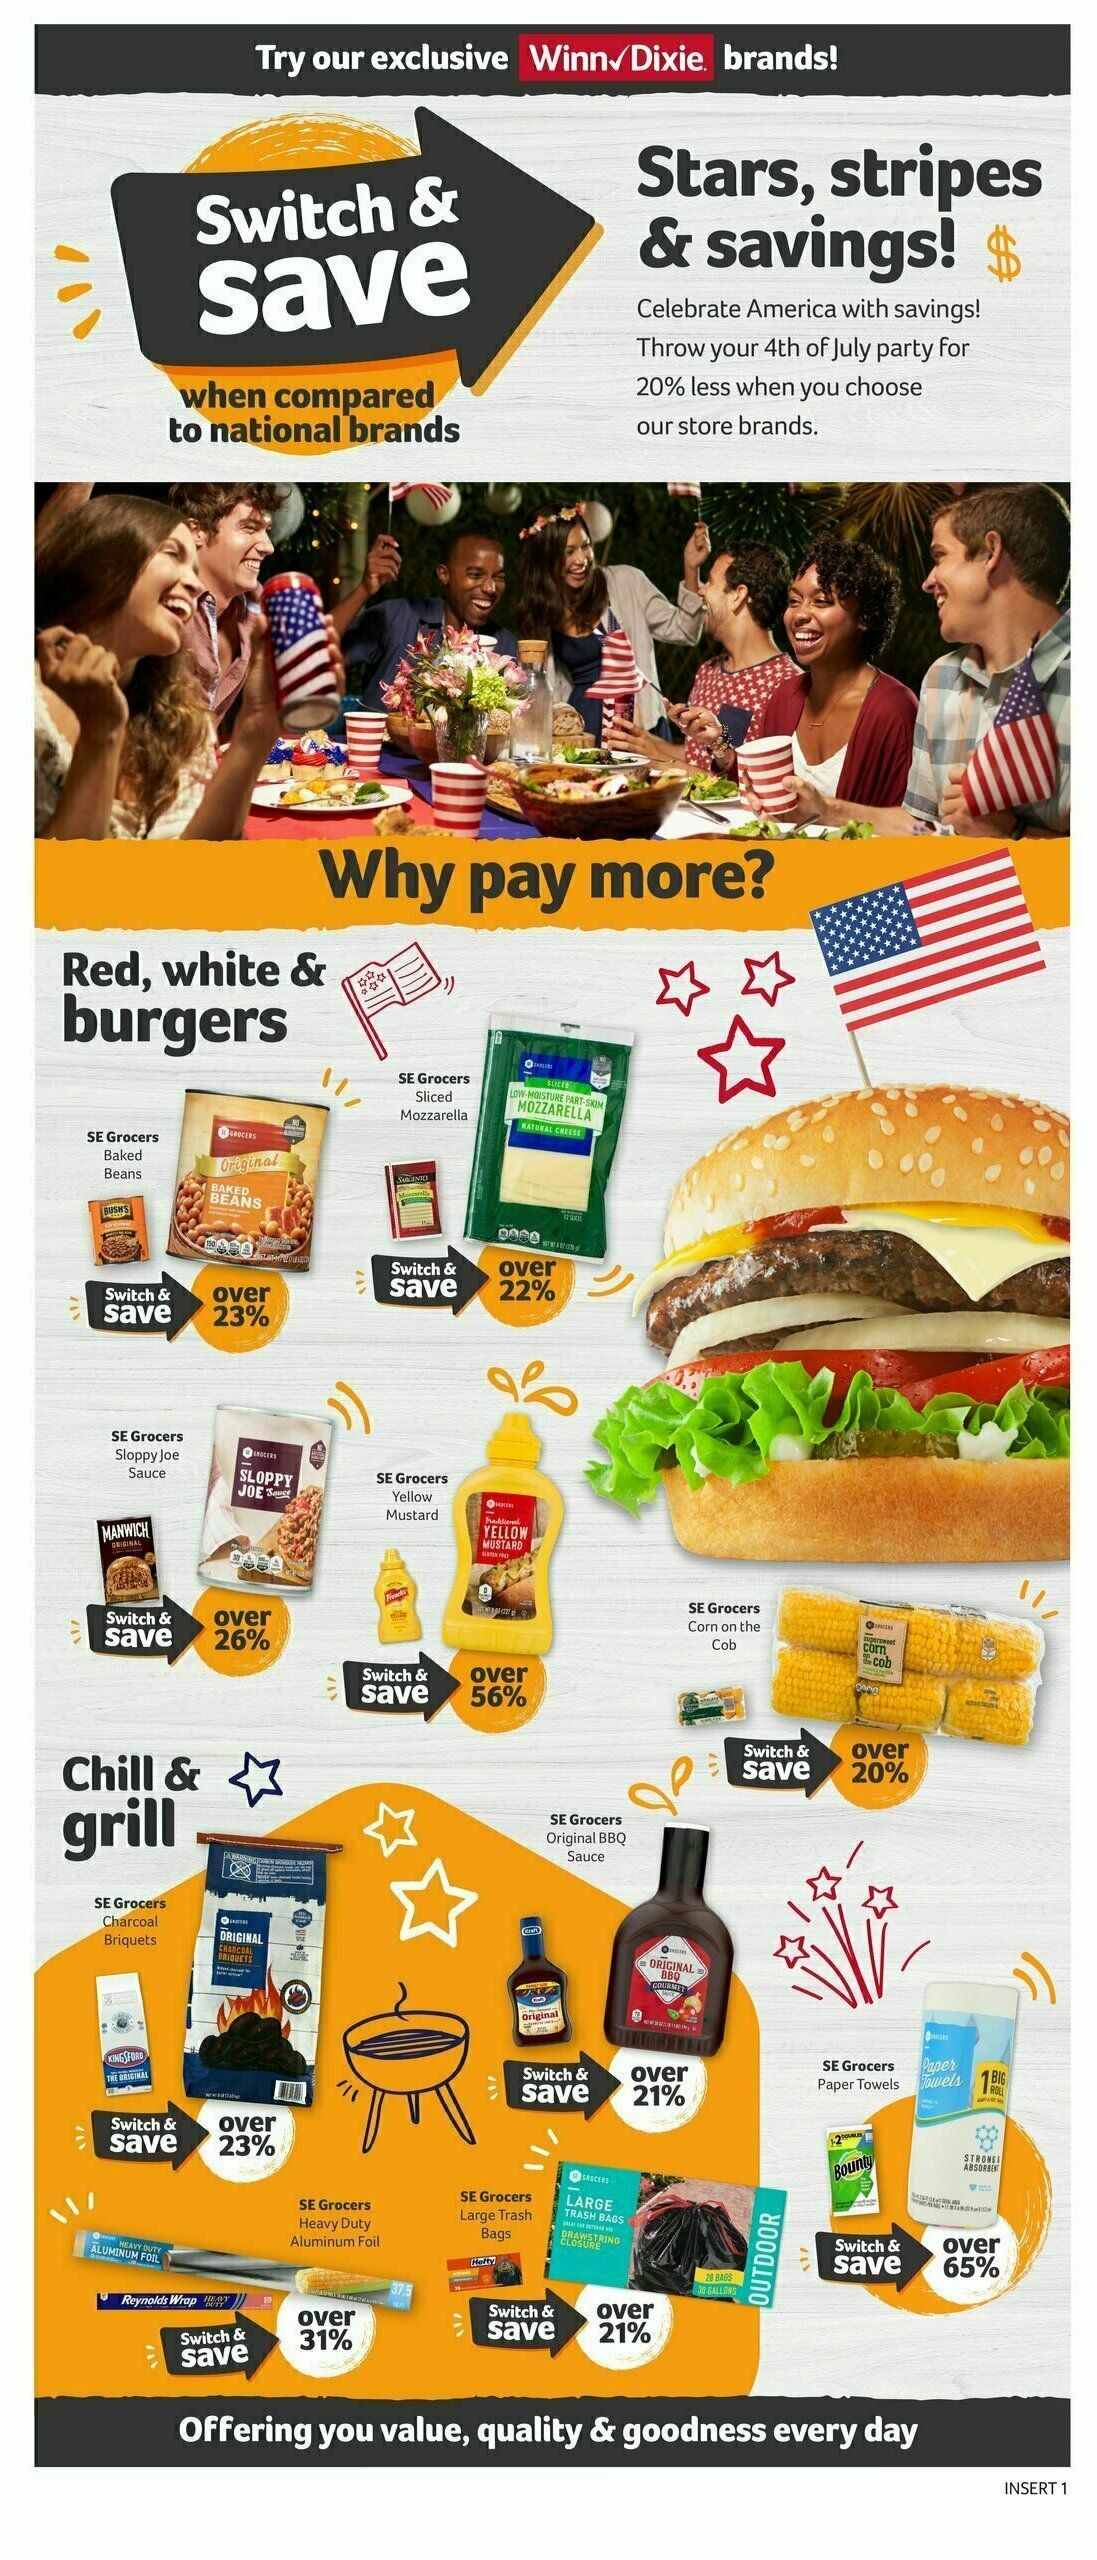 Winn-Dixie Weekly Ad from July 5